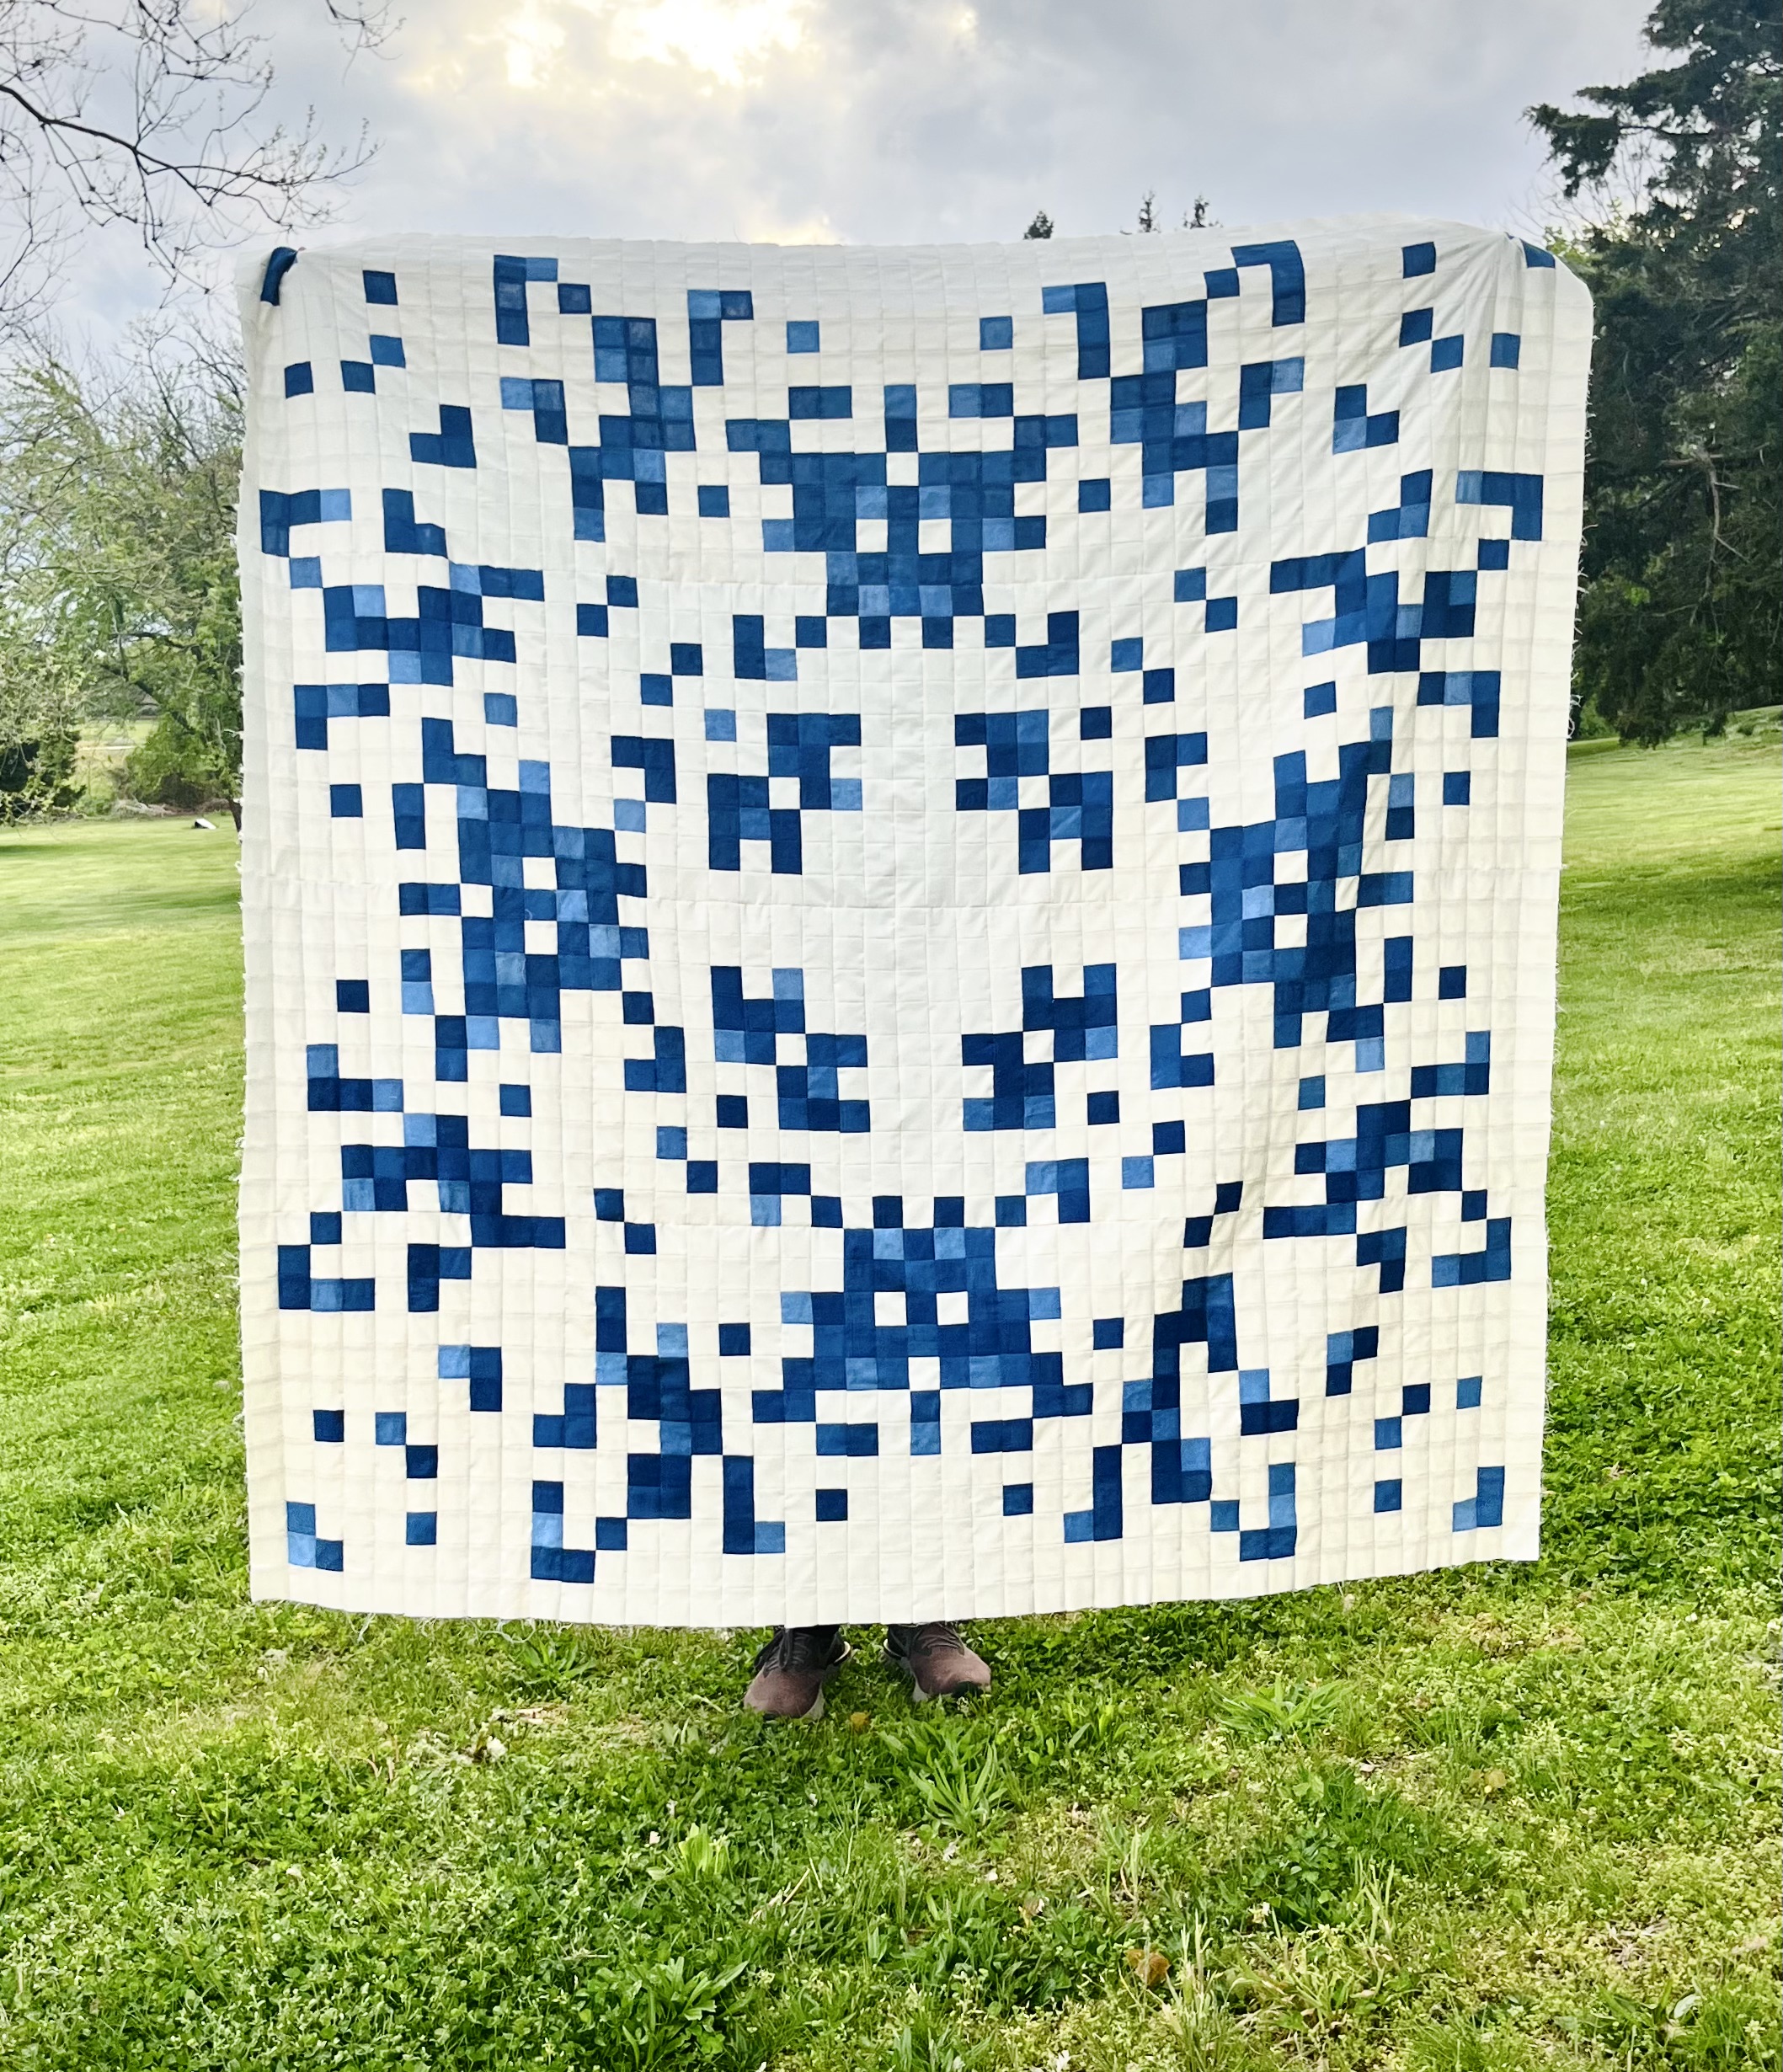 /A%20large%20blue%20and%20white%20quilt%20is%20held%20up%20outside%20in%20a%20field%20of%20green%20grass%20at%20golden%20hour.